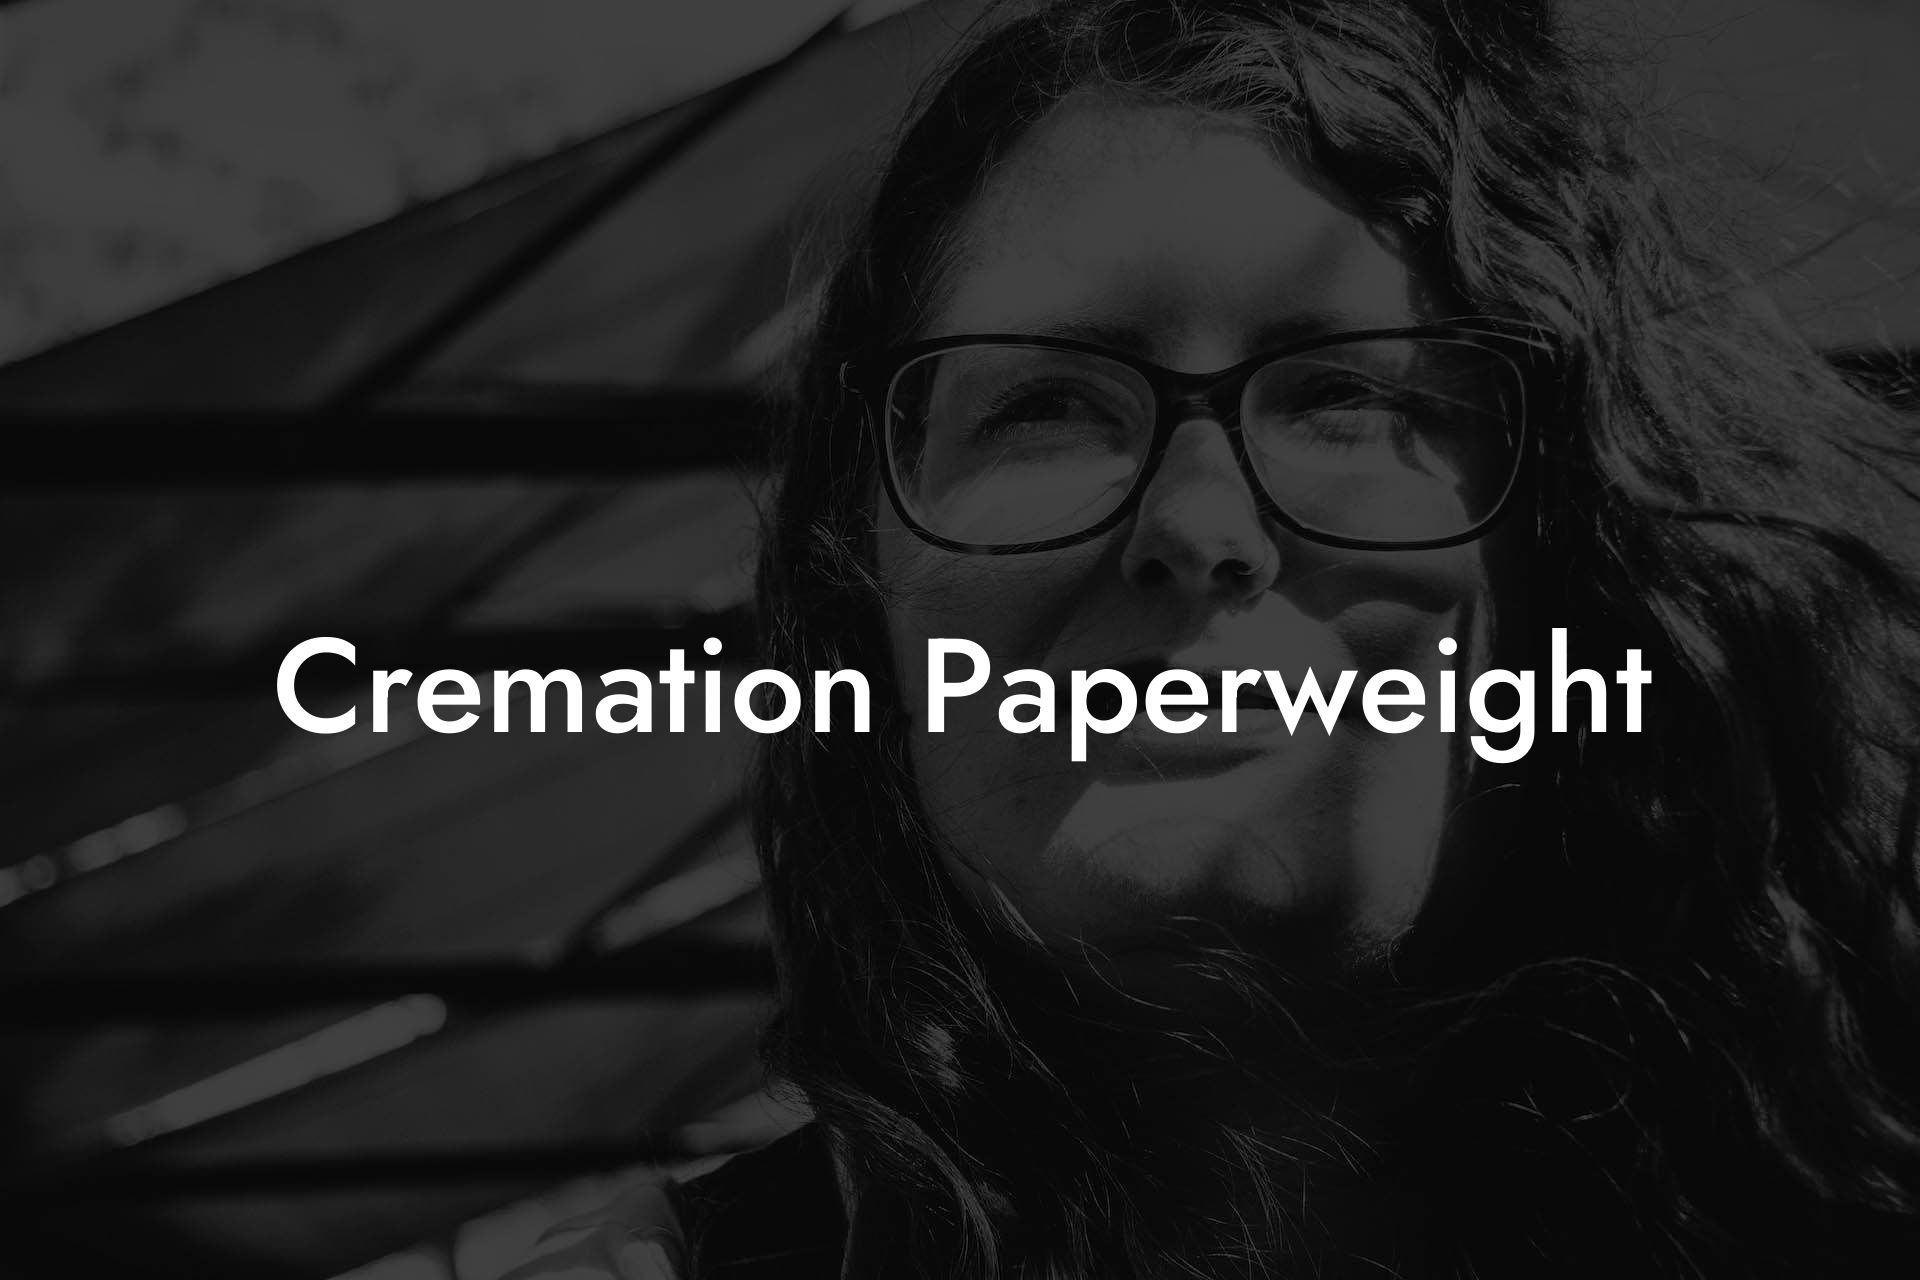 Cremation Paperweight